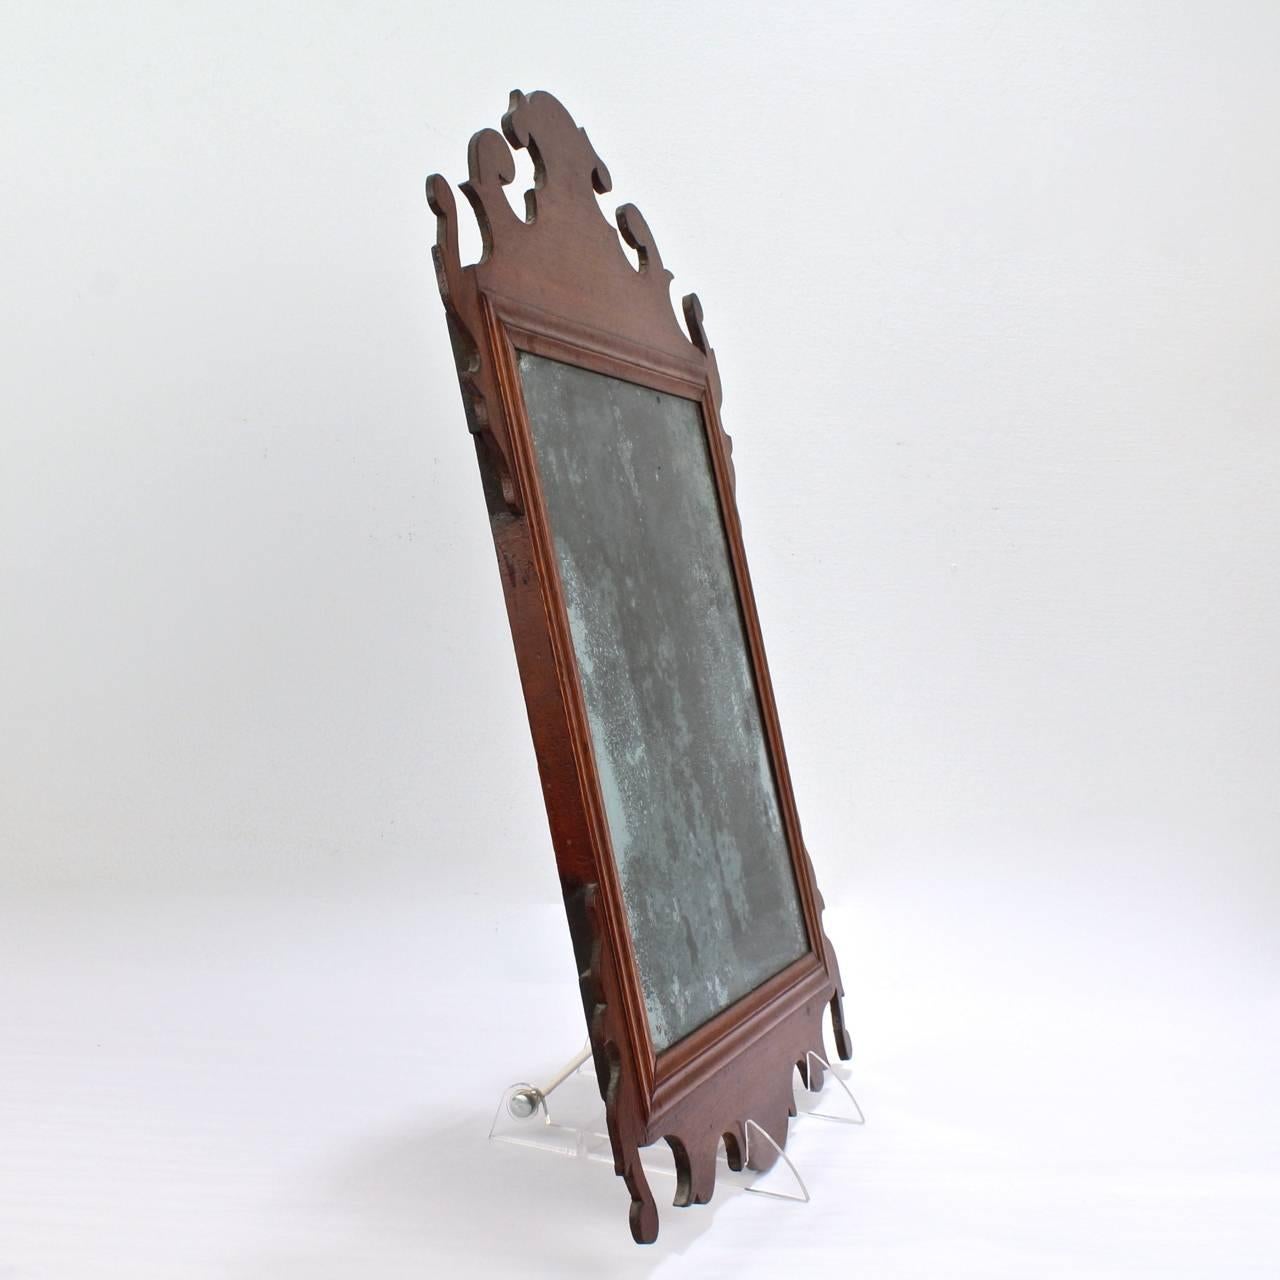 English Diminutive 18th Century Mahogany Chippendale Mirror or Looking Glass